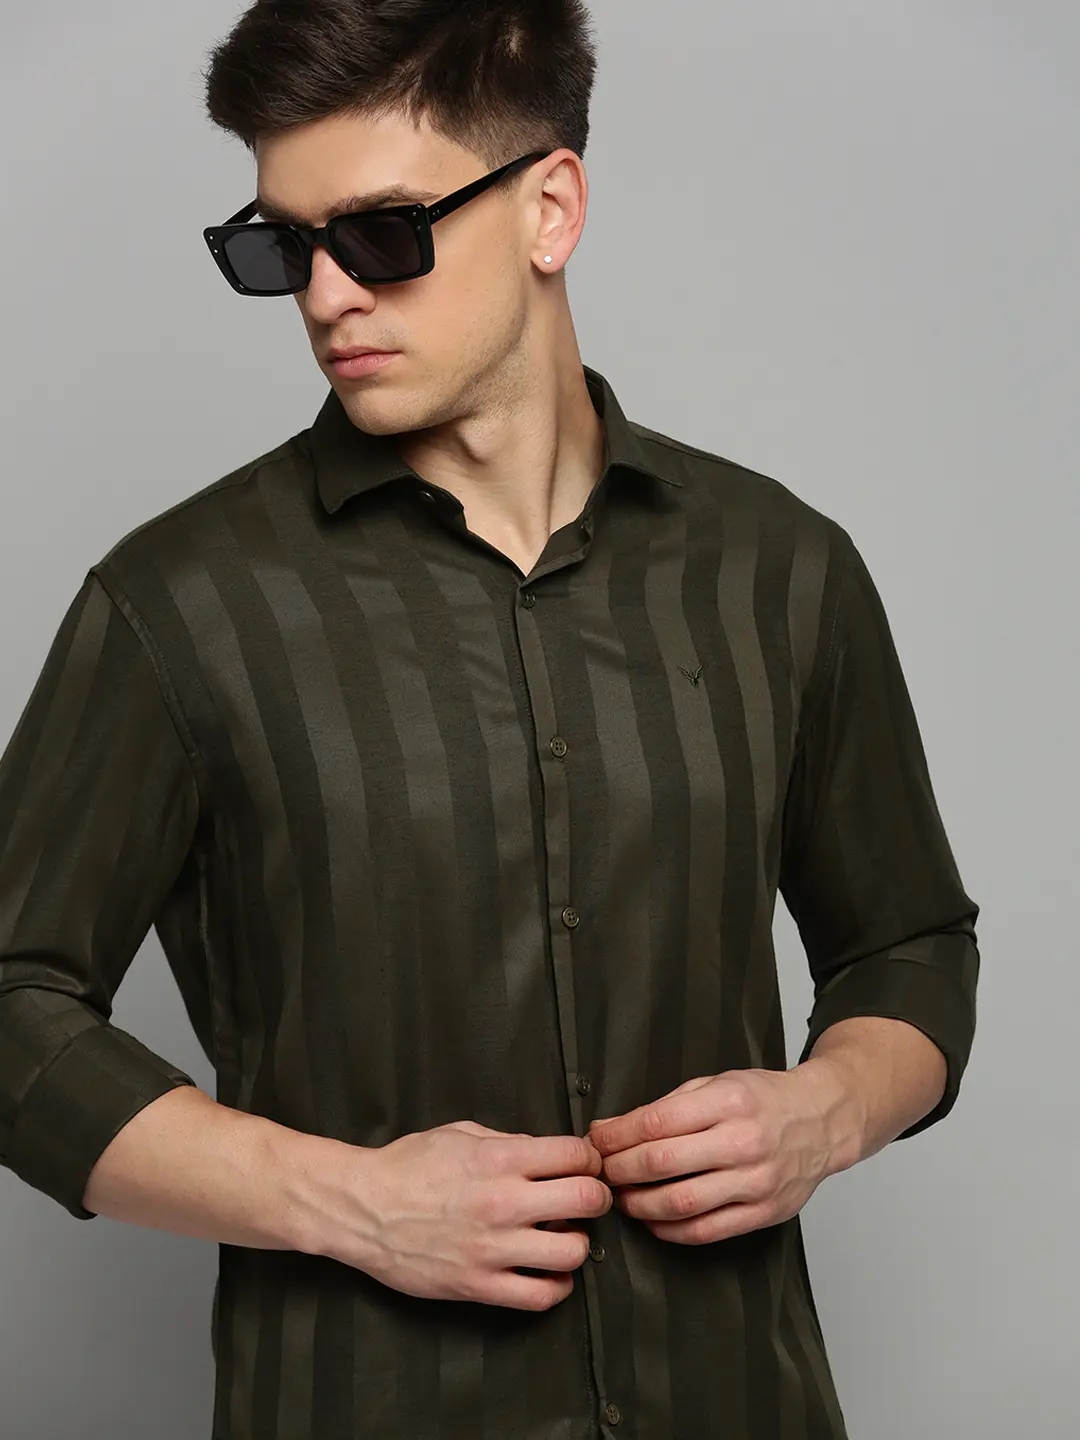 SHOWOFF Men's Spread Collar Solid Olive Classic Shirt